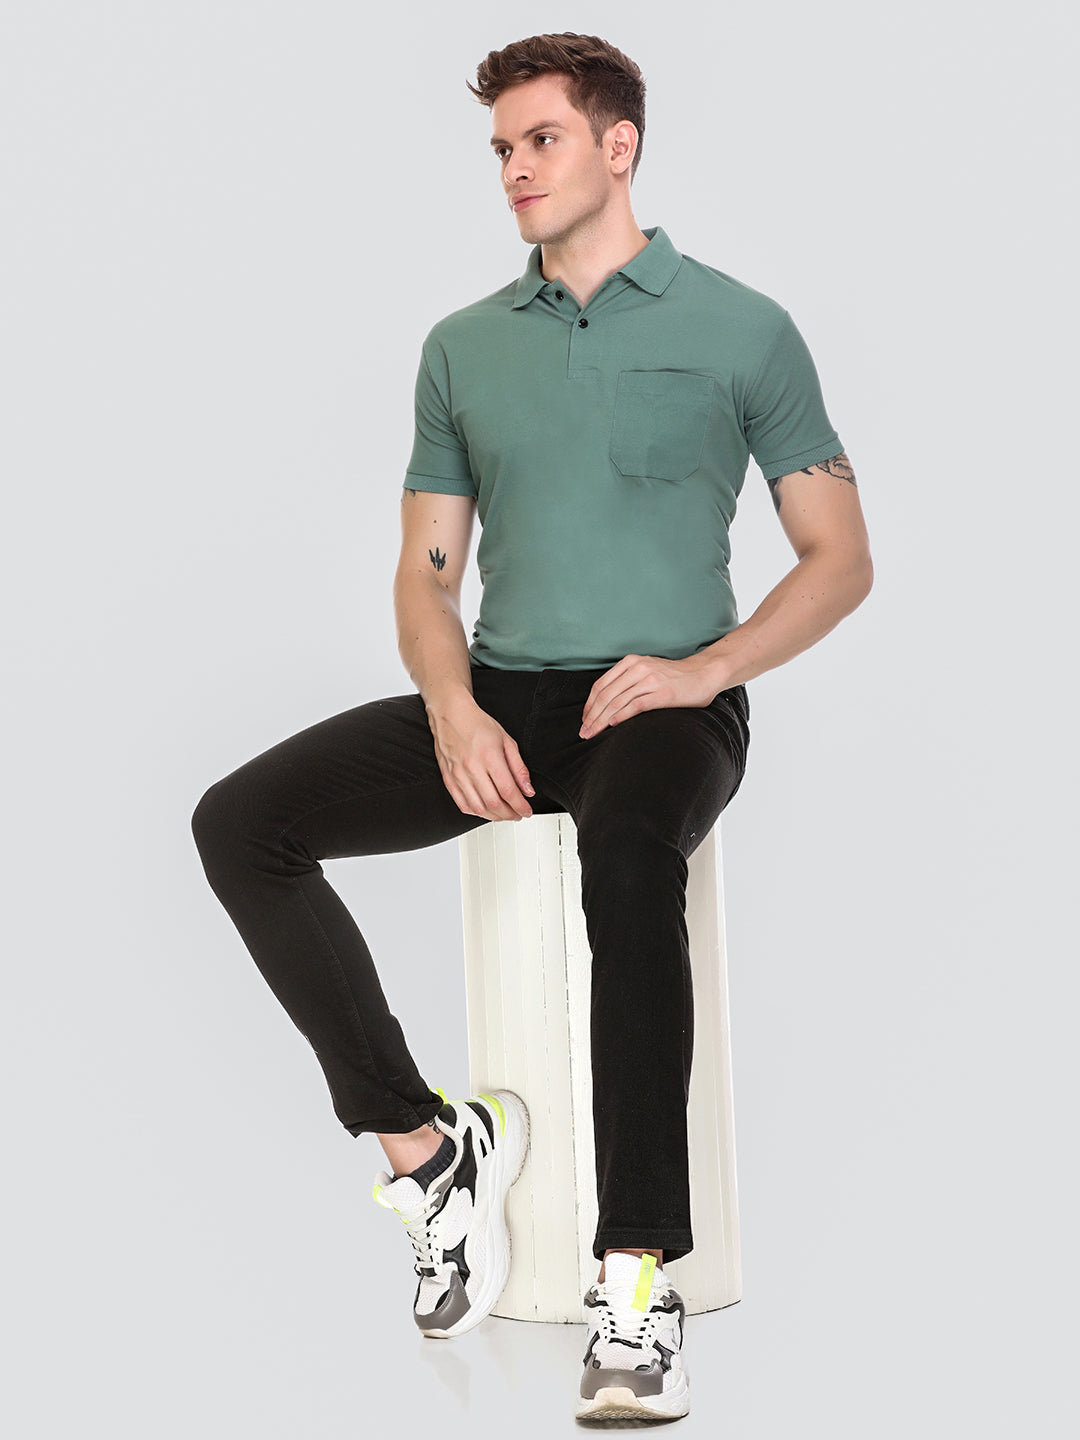 Comfortable Jinxer Polo Neck T Shirt for men online in India